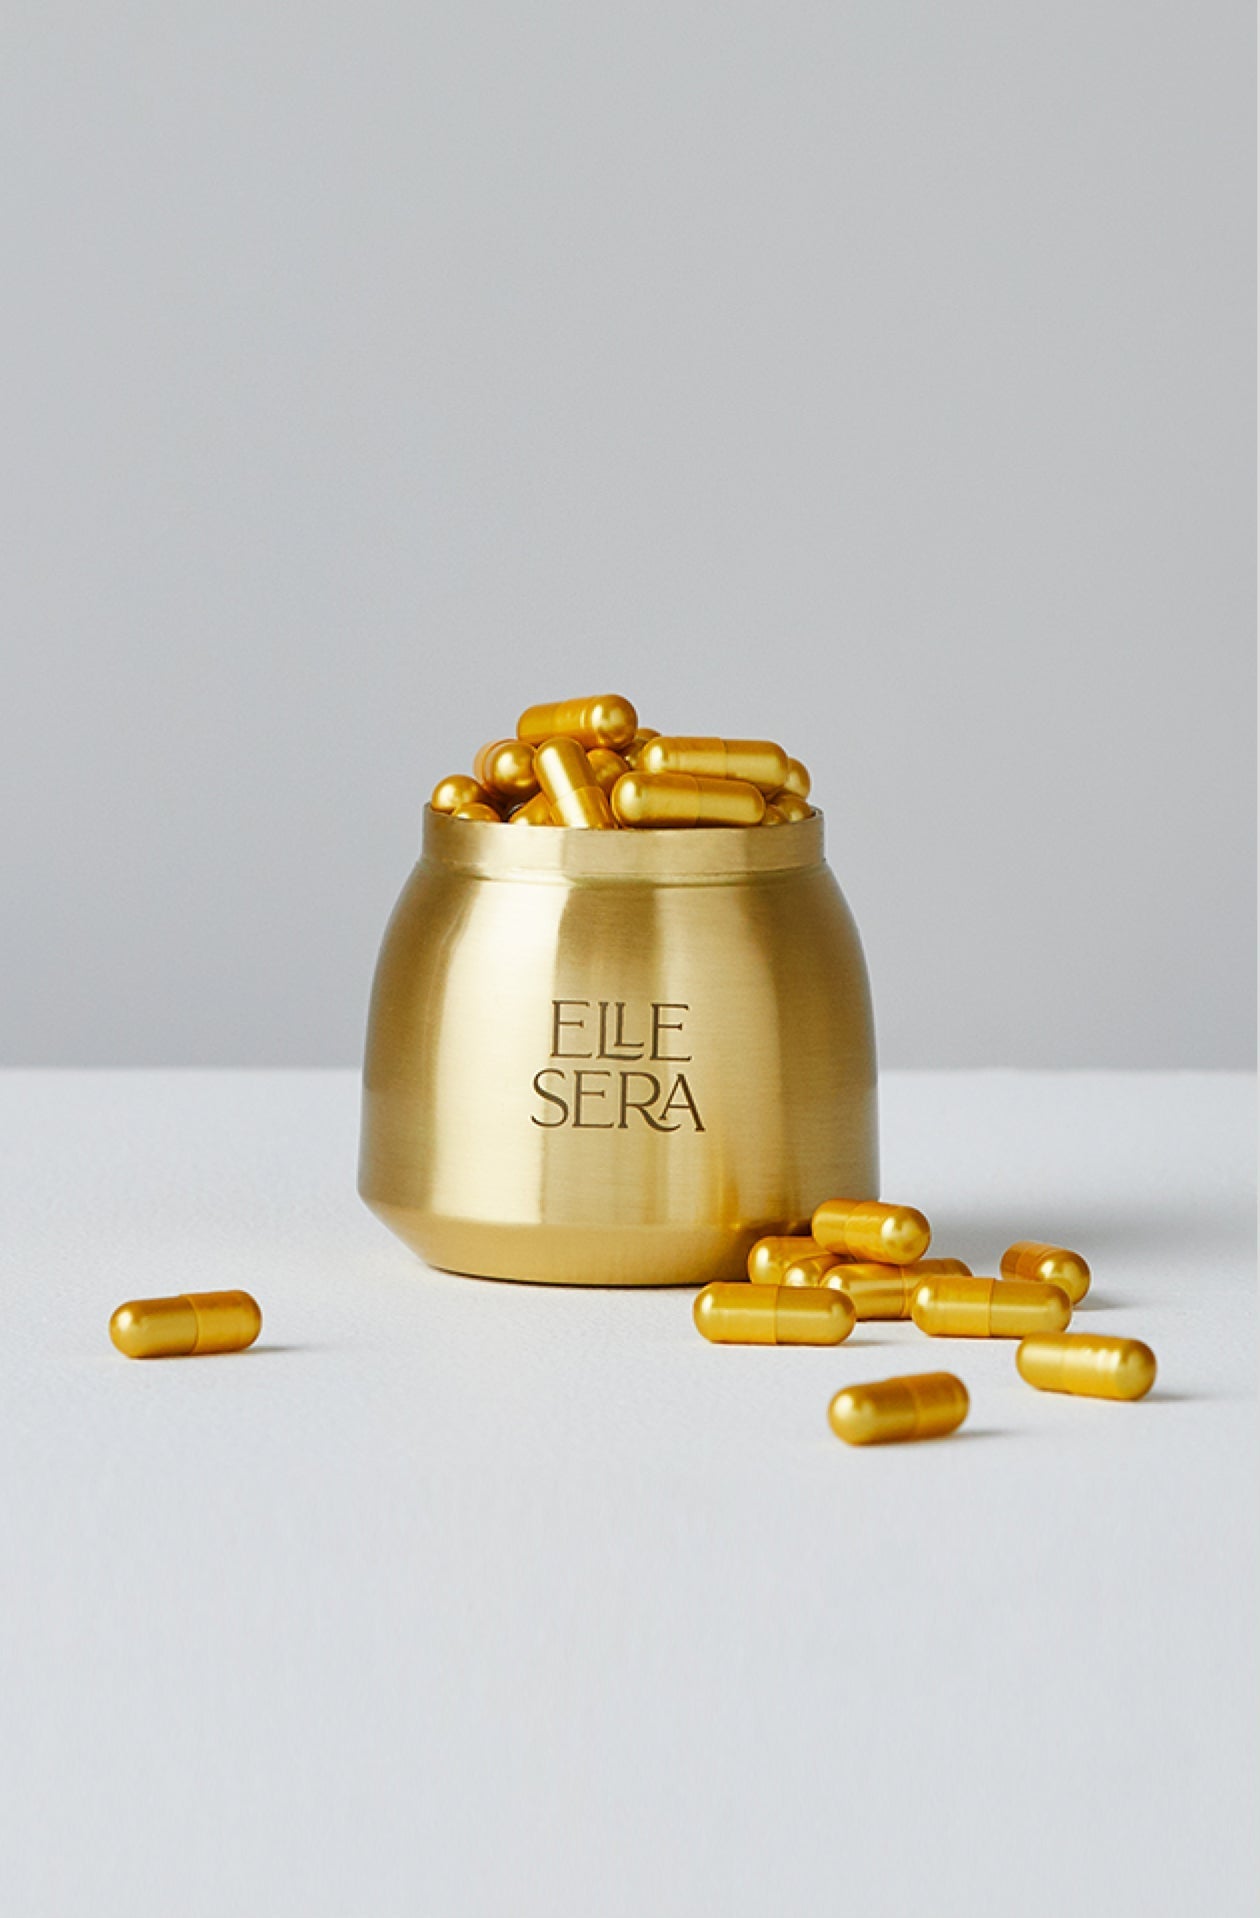 The Golden Pill (One Time Purchase)